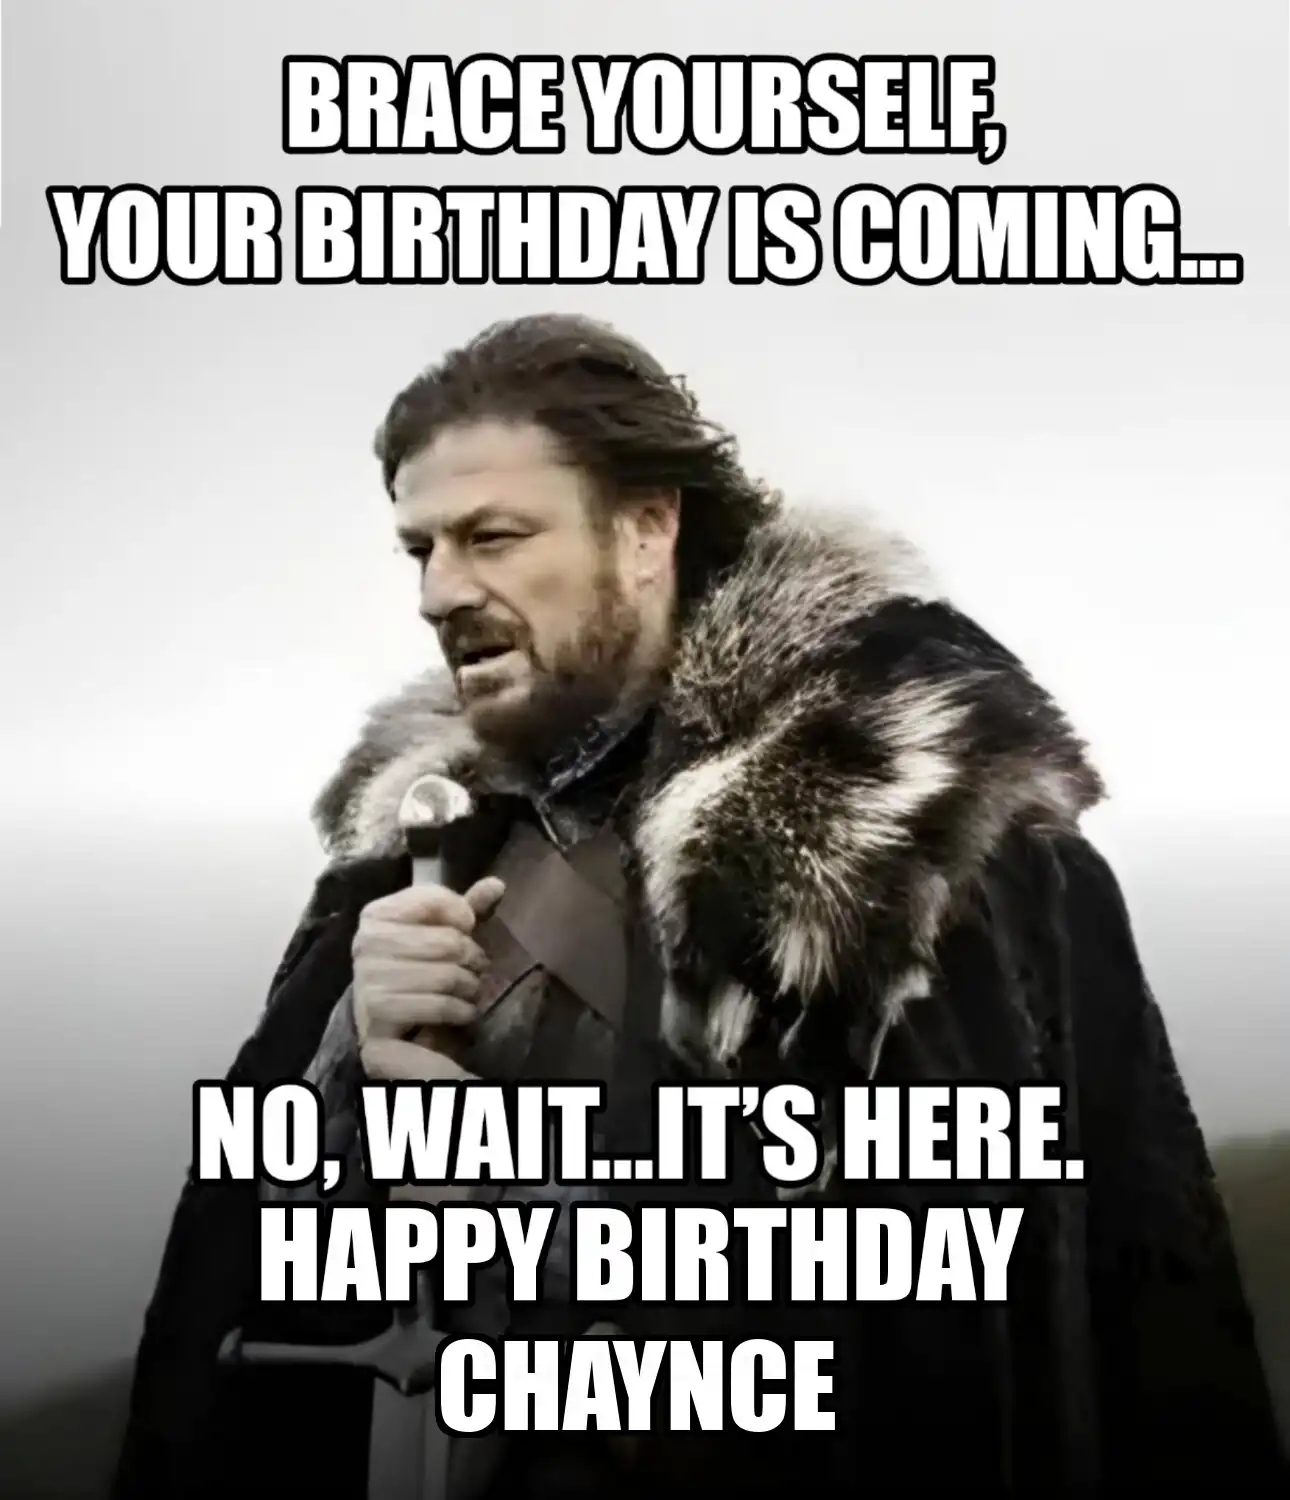 Happy Birthday Chaynce Brace Yourself Your Birthday Is Coming Meme